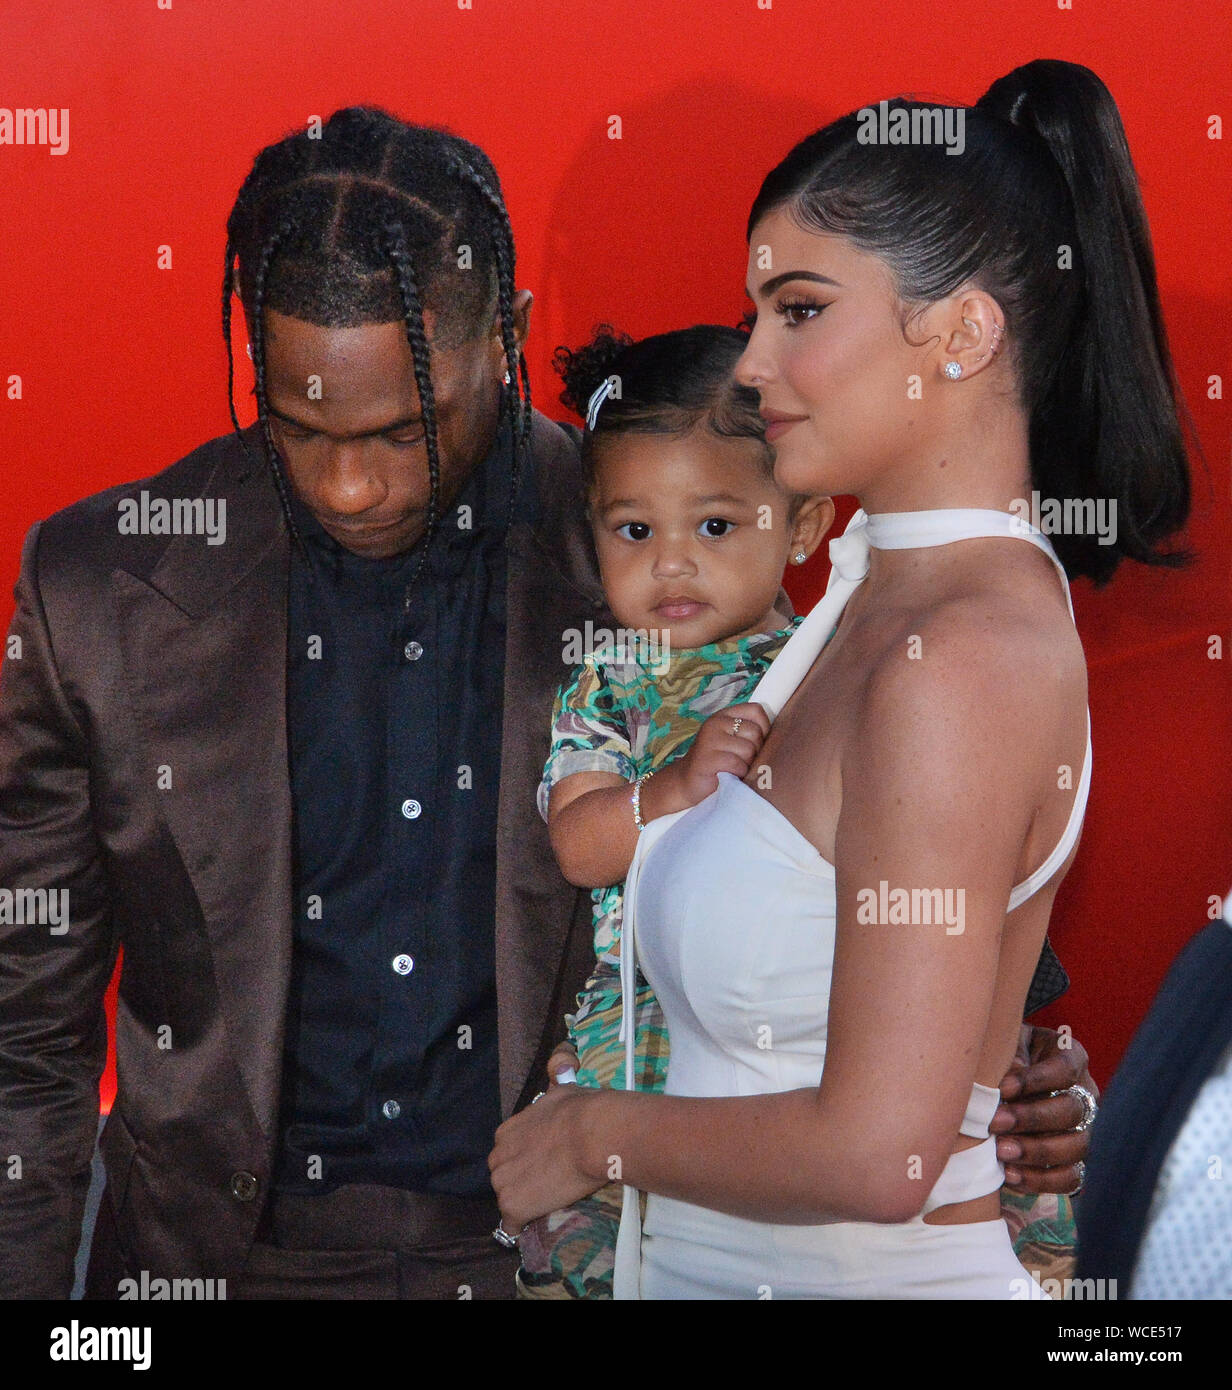 Santa Monica, California, USA. 28th Aug, 2019. Rapper Travis Scott and Kylie Jenner and their daughter Stormi attend the premiere of Netflix's 'Travis Scott: Look Mom I Can Fly' at Barker Hangar on August 27, 2019 in Santa Monica, California. 'Travis Scott: Look Mom I Can Fly' traces the Houston rapper's rise to super-stardom, focusing on the months surrounding Scott's third album 'Astroworld'.  Photo by Jim Ruymen/UPI Credit: UPI/Alamy Live News Stock Photo